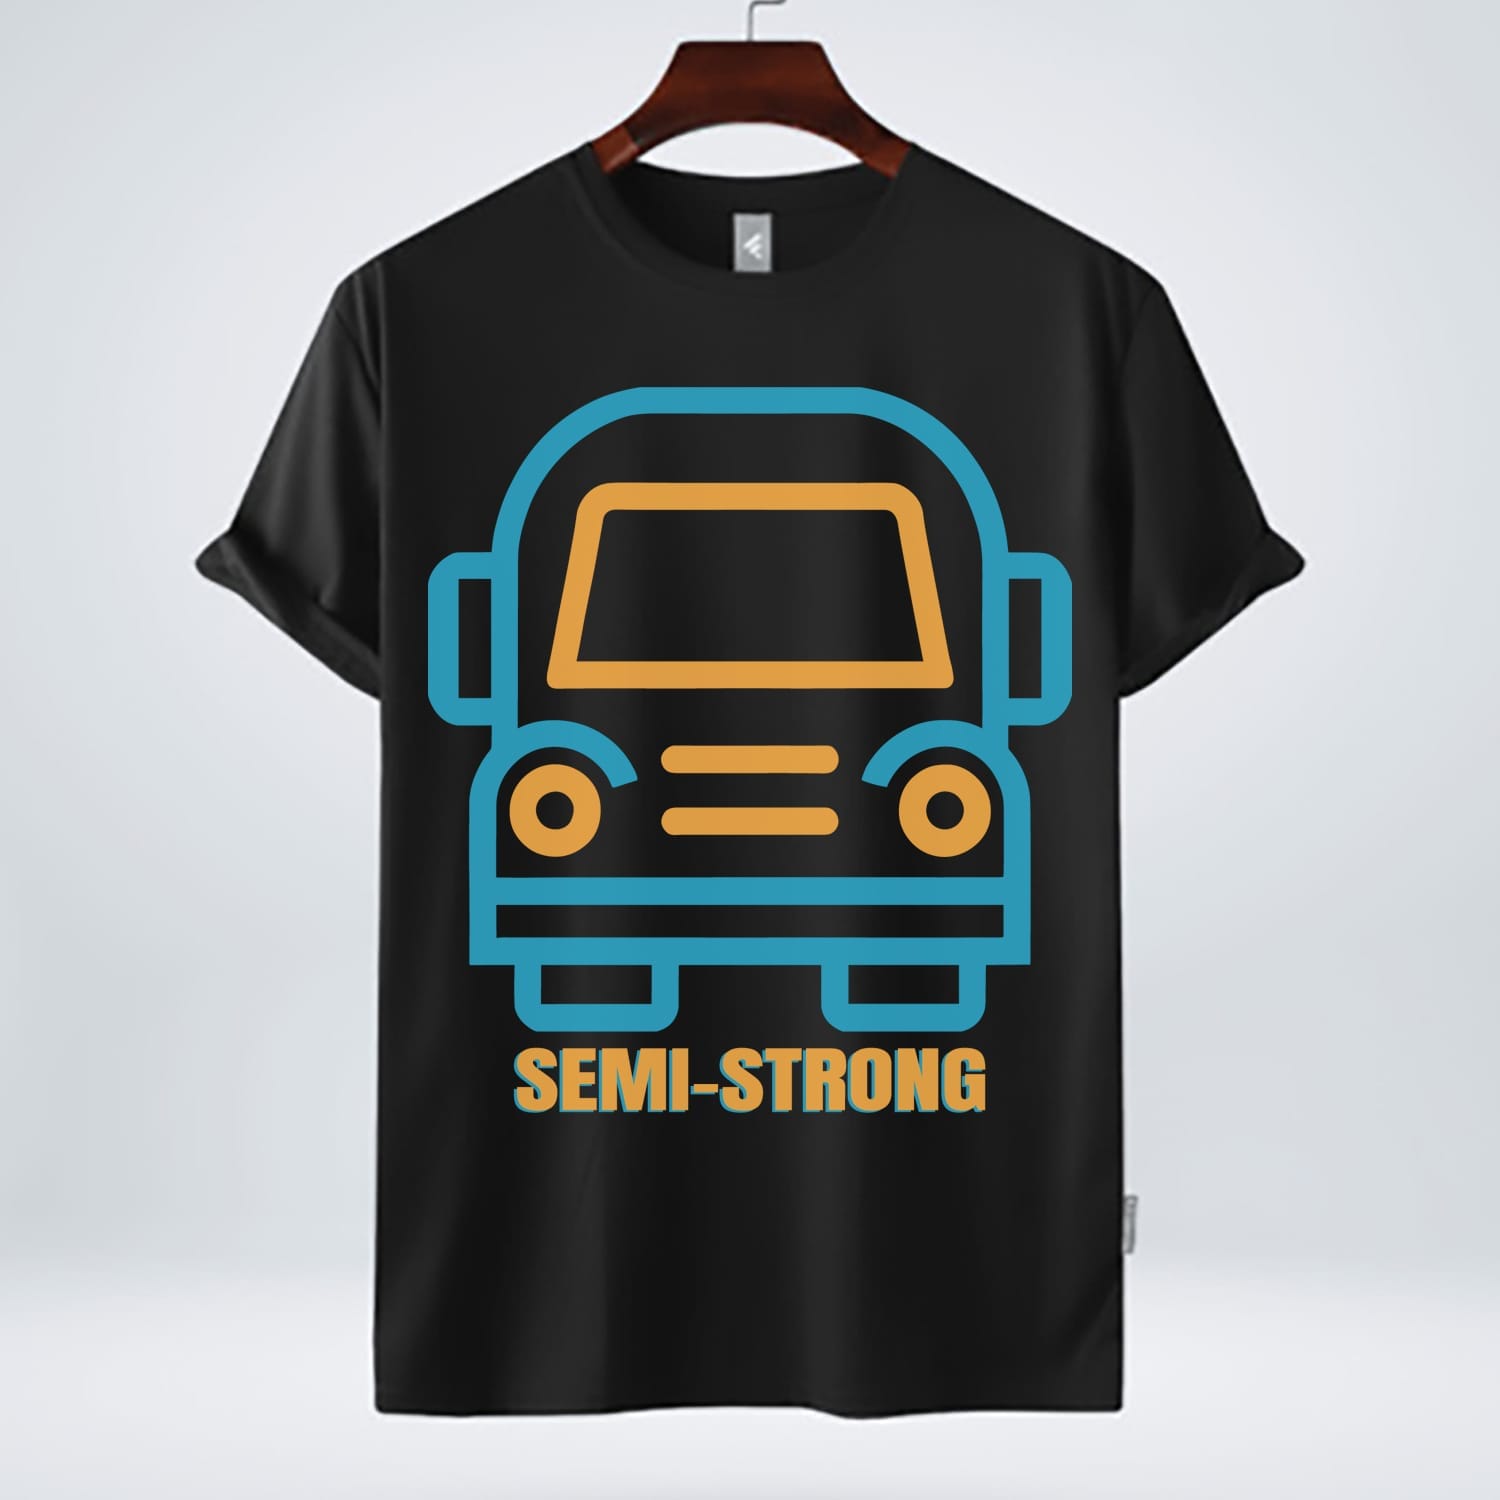 "Semi-Strong: Elevate your trucker style with our exclusive t-shirt design. Discover the road to strength. Get yours today!"